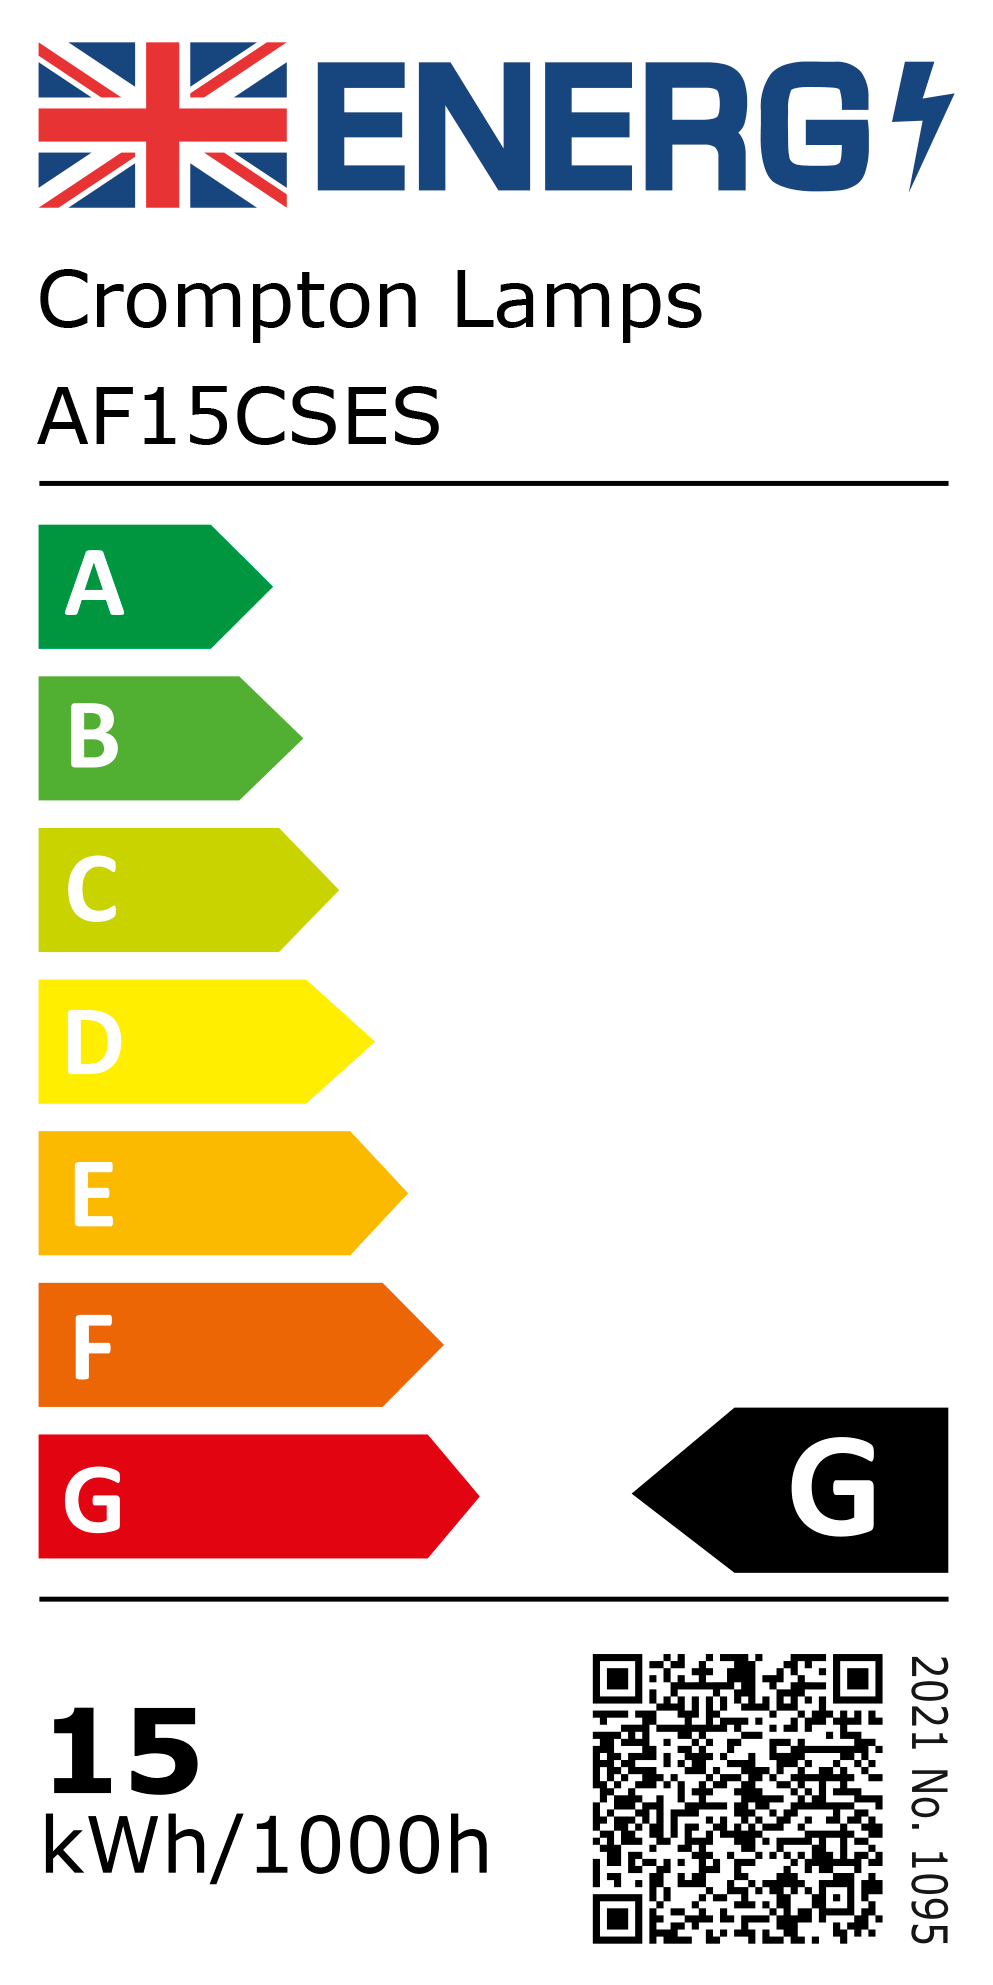 New 2021 Energy Rating Label: Stock Code AF15CSES